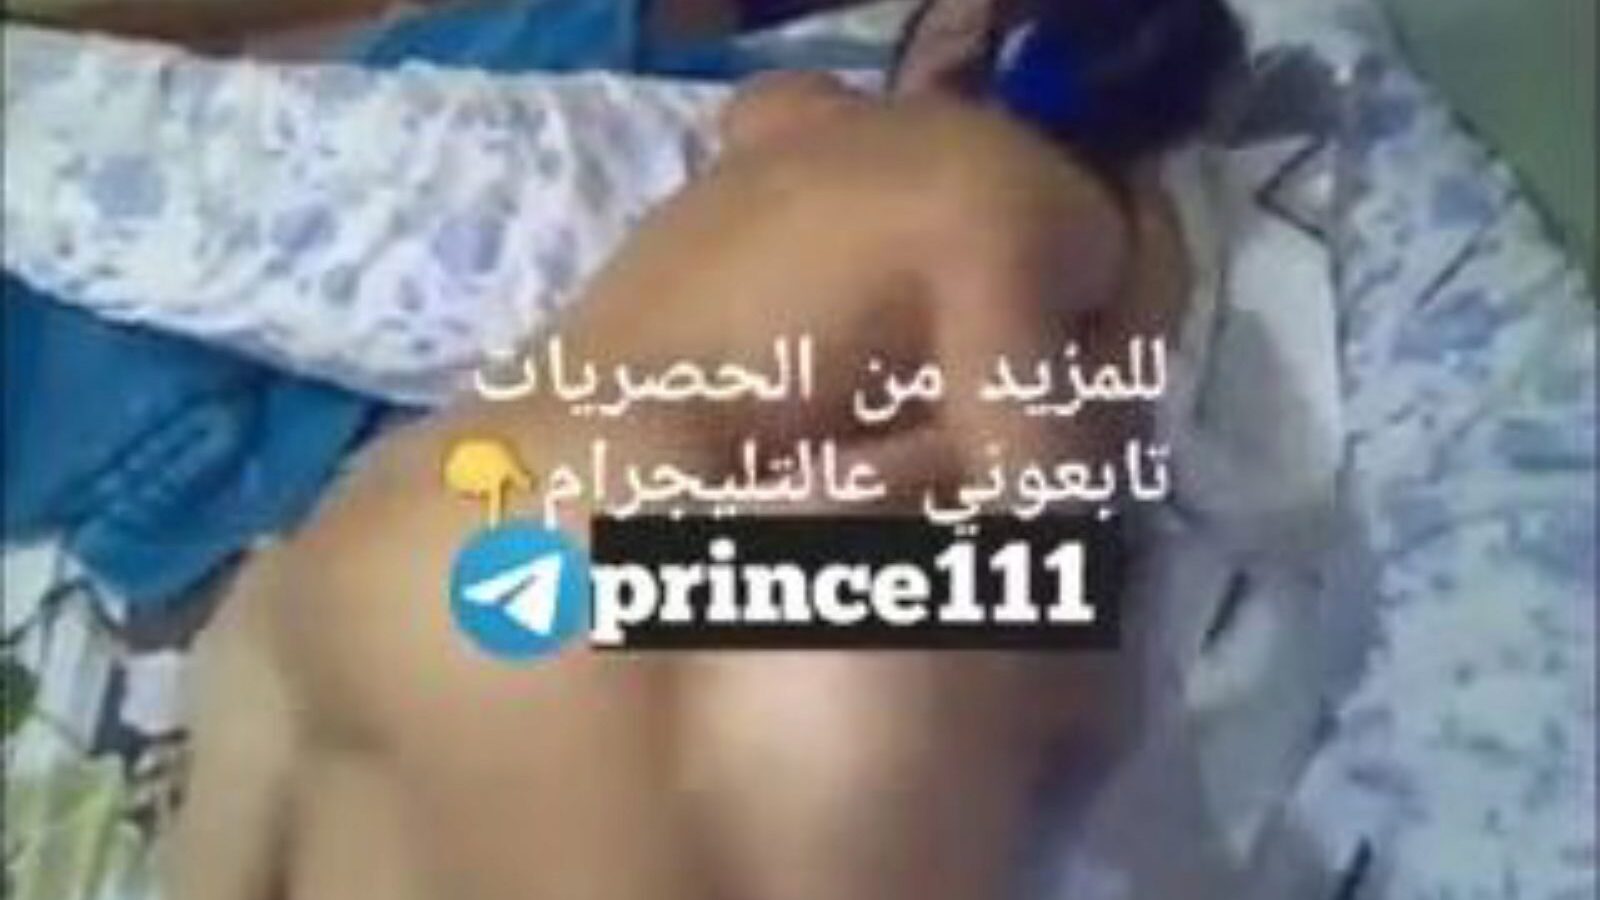 Egyptian Lesbians Real, Free Xnxx Real Porn ce: xHamster | xHamster Watch Egyptian Lesbians Real episode on xHamster, the fattest bang-out tube web resource with tons of free Arab Xnxx Real & Real Cctv porno episodes